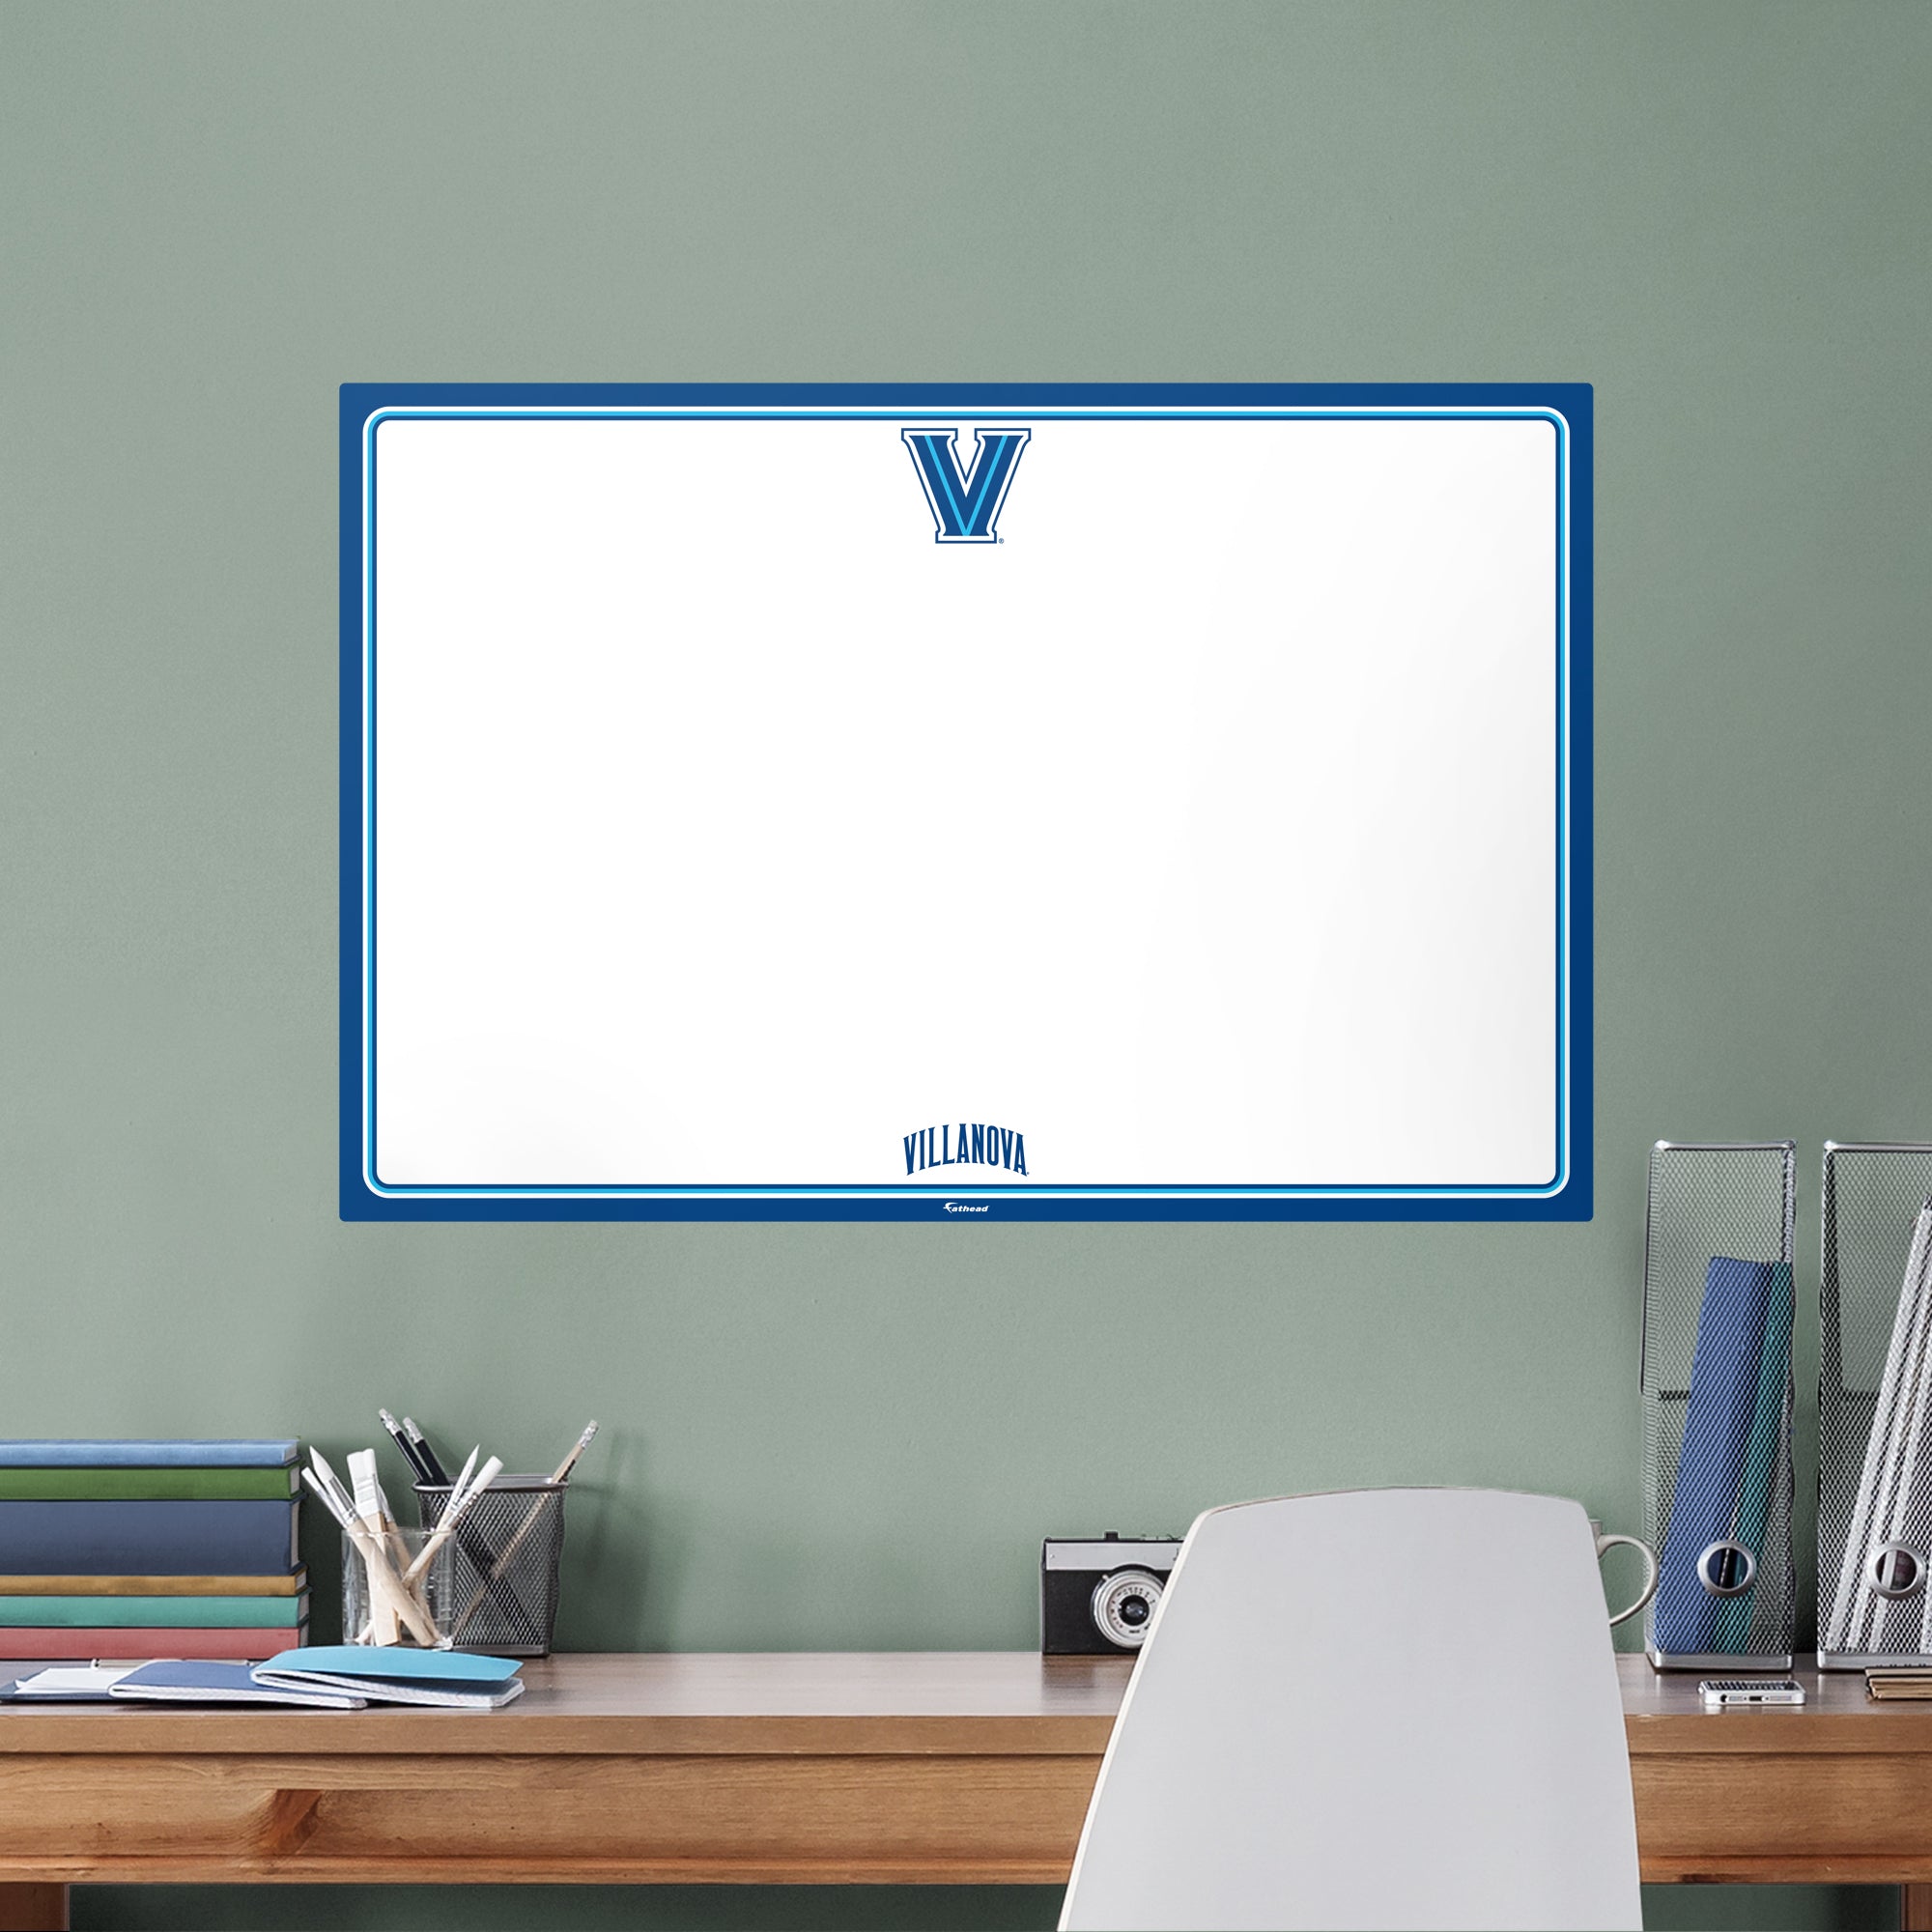 Villanova Wildcats: Dry Erase Whiteboard - X-Large Officially Licensed NCAA Removable Wall Decal XL by Fathead | Vinyl